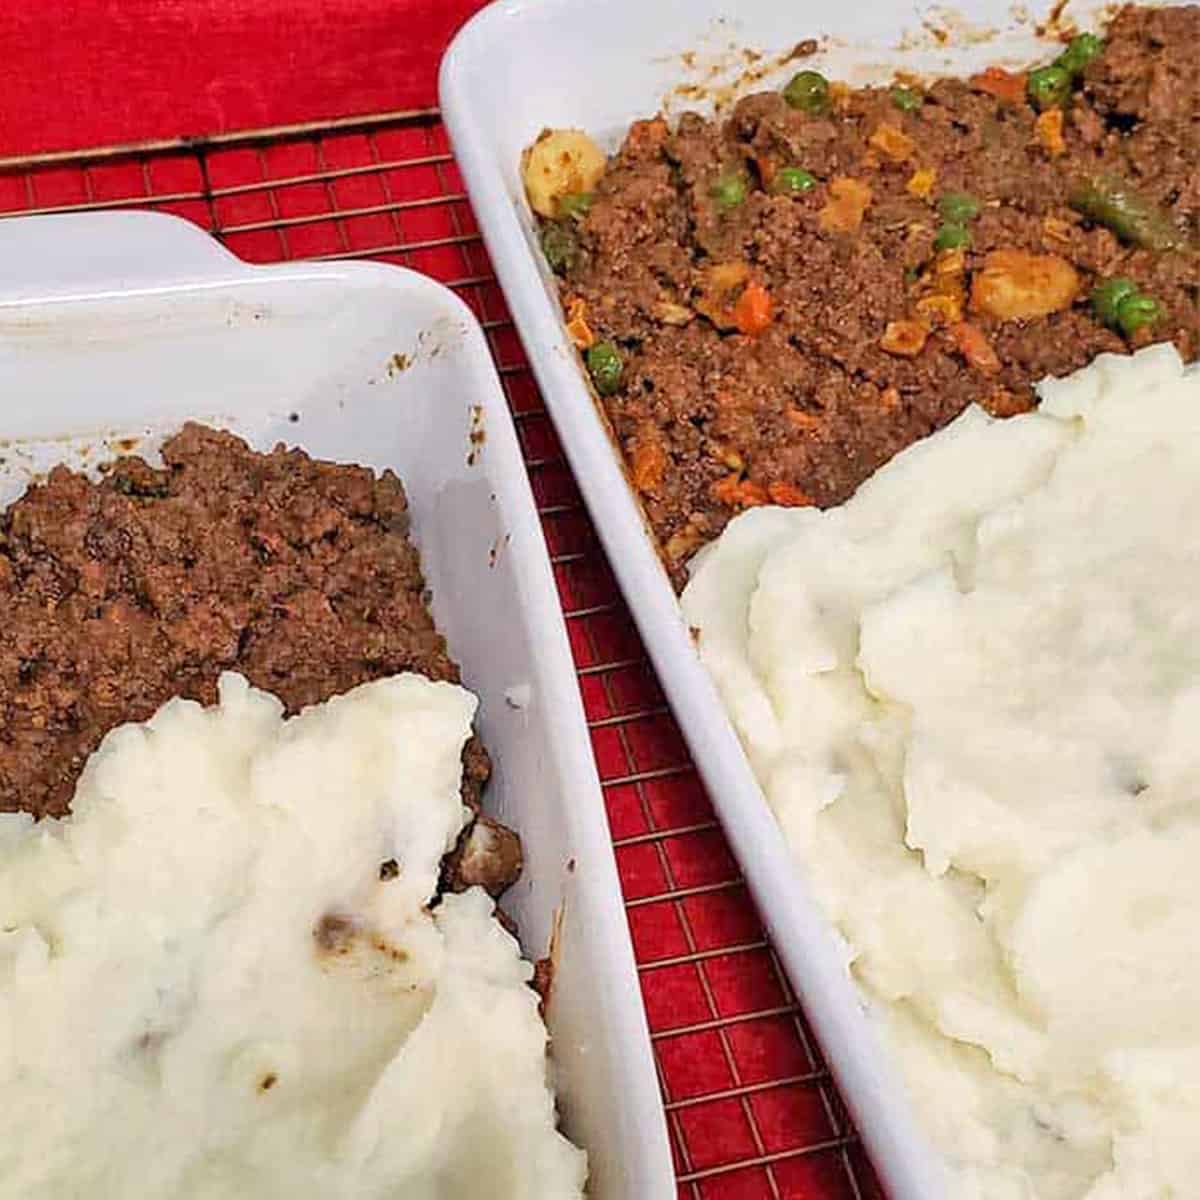 Cottage pie made from dehydrated vegetables